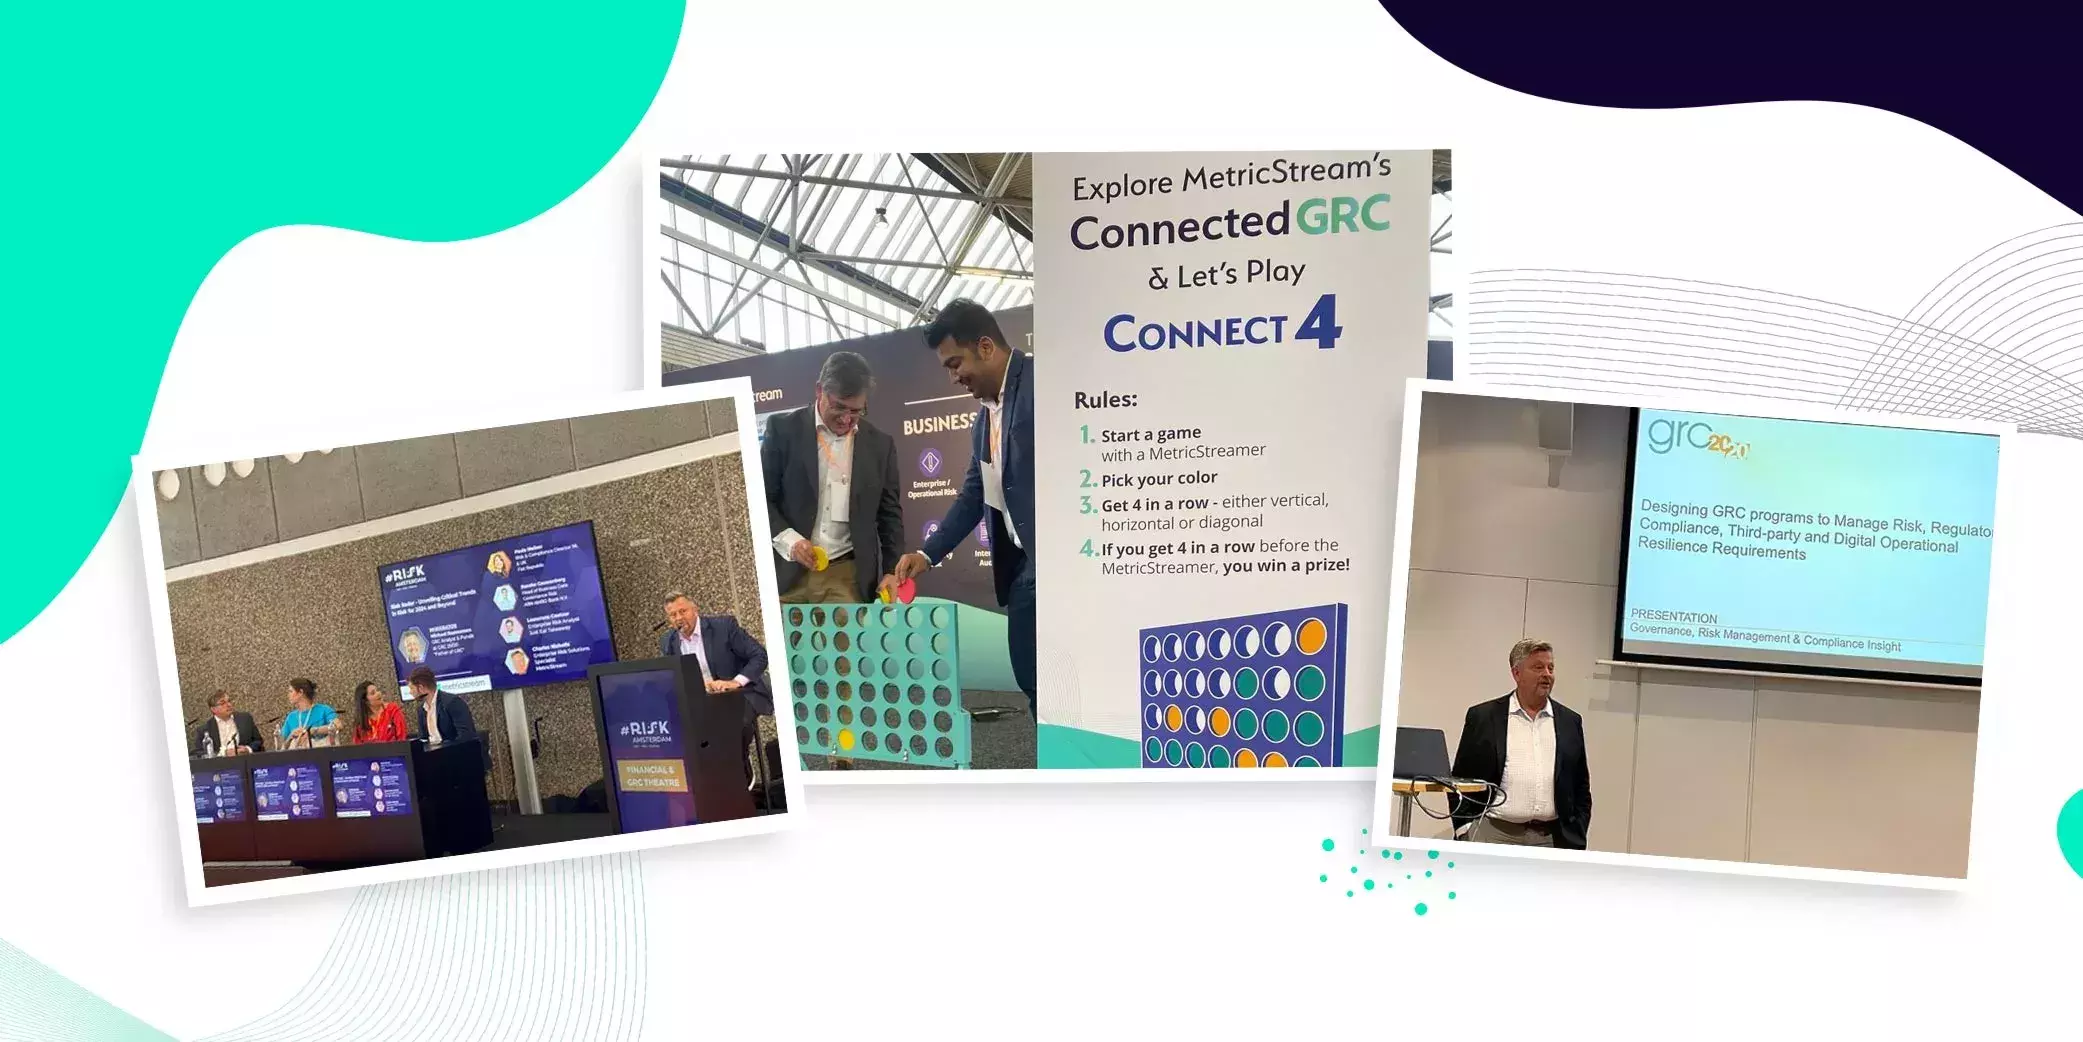 MetricStream in Amsterdam: Key Takeaways from 3 Days of Conversations with GRC Experts